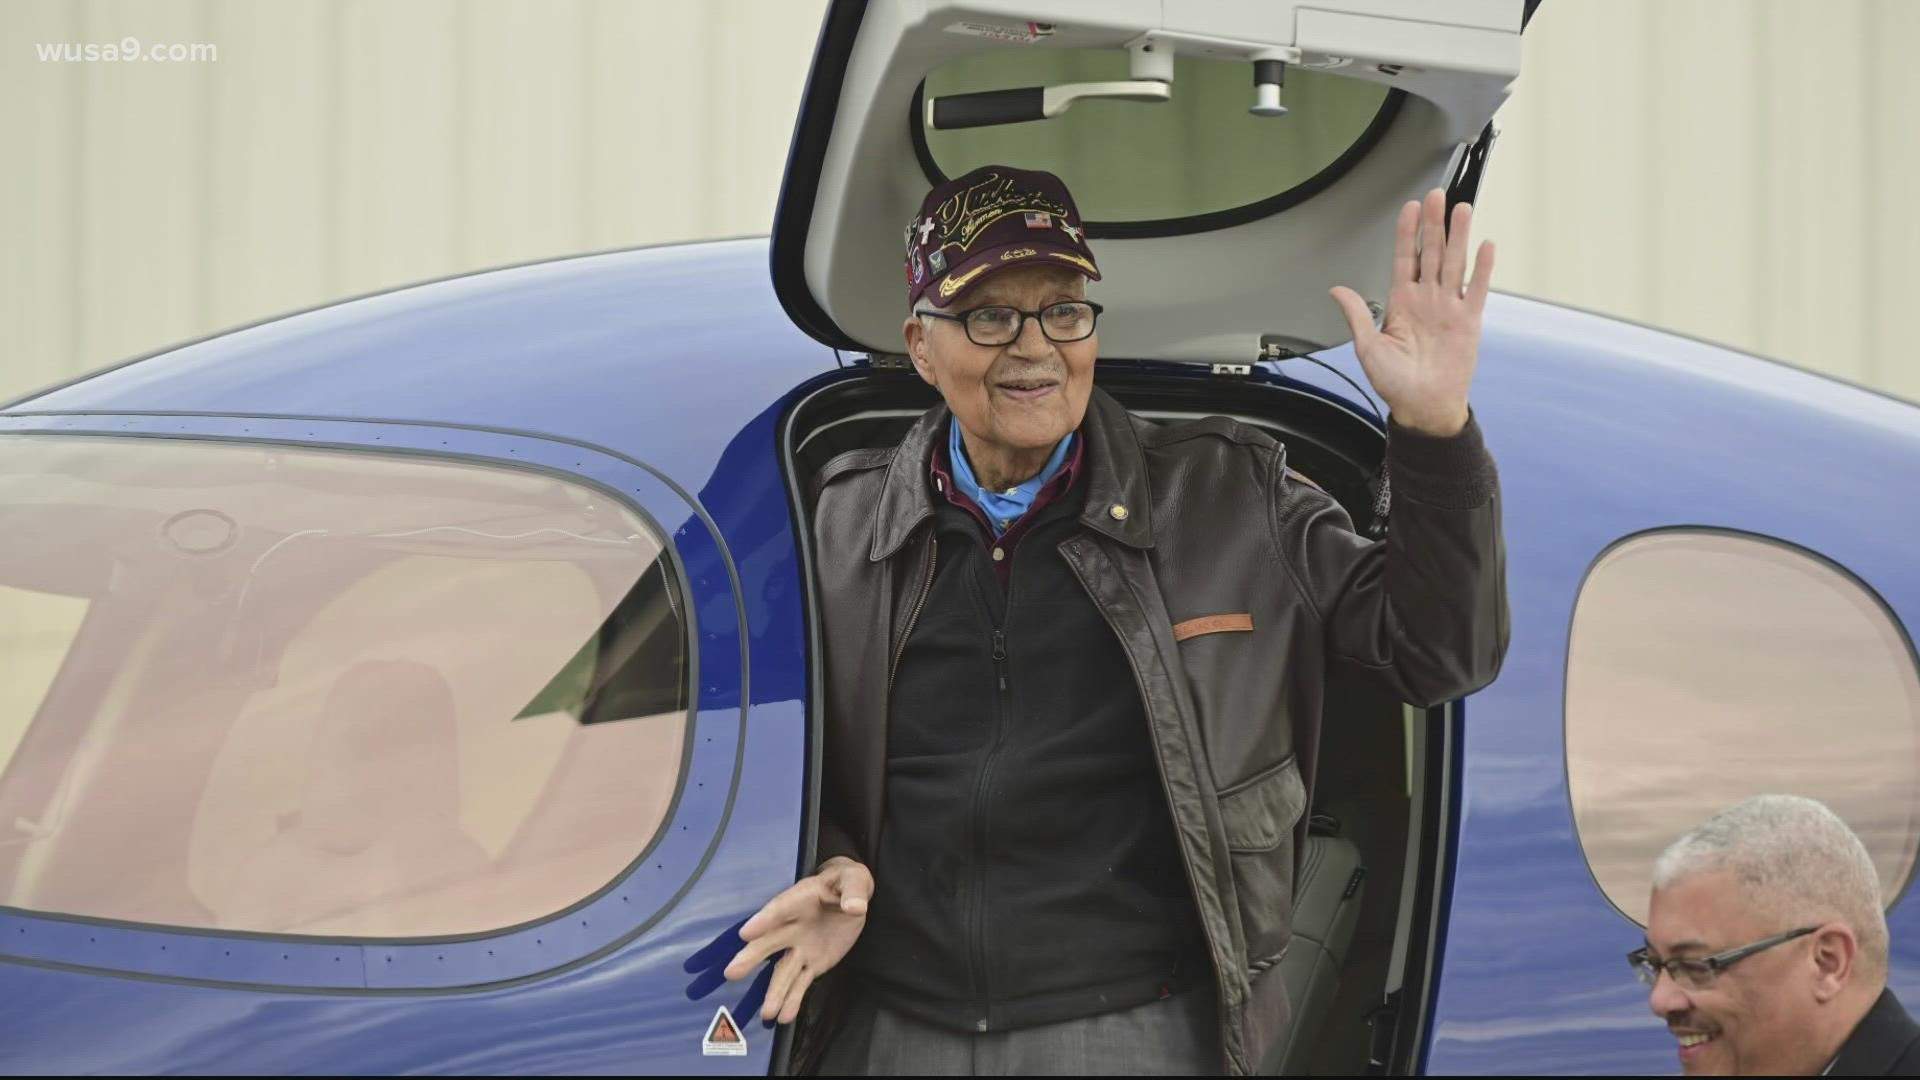 The new name would pay tribute to former Tuskegee Airman Charles McGee, who passed away last month at 102.